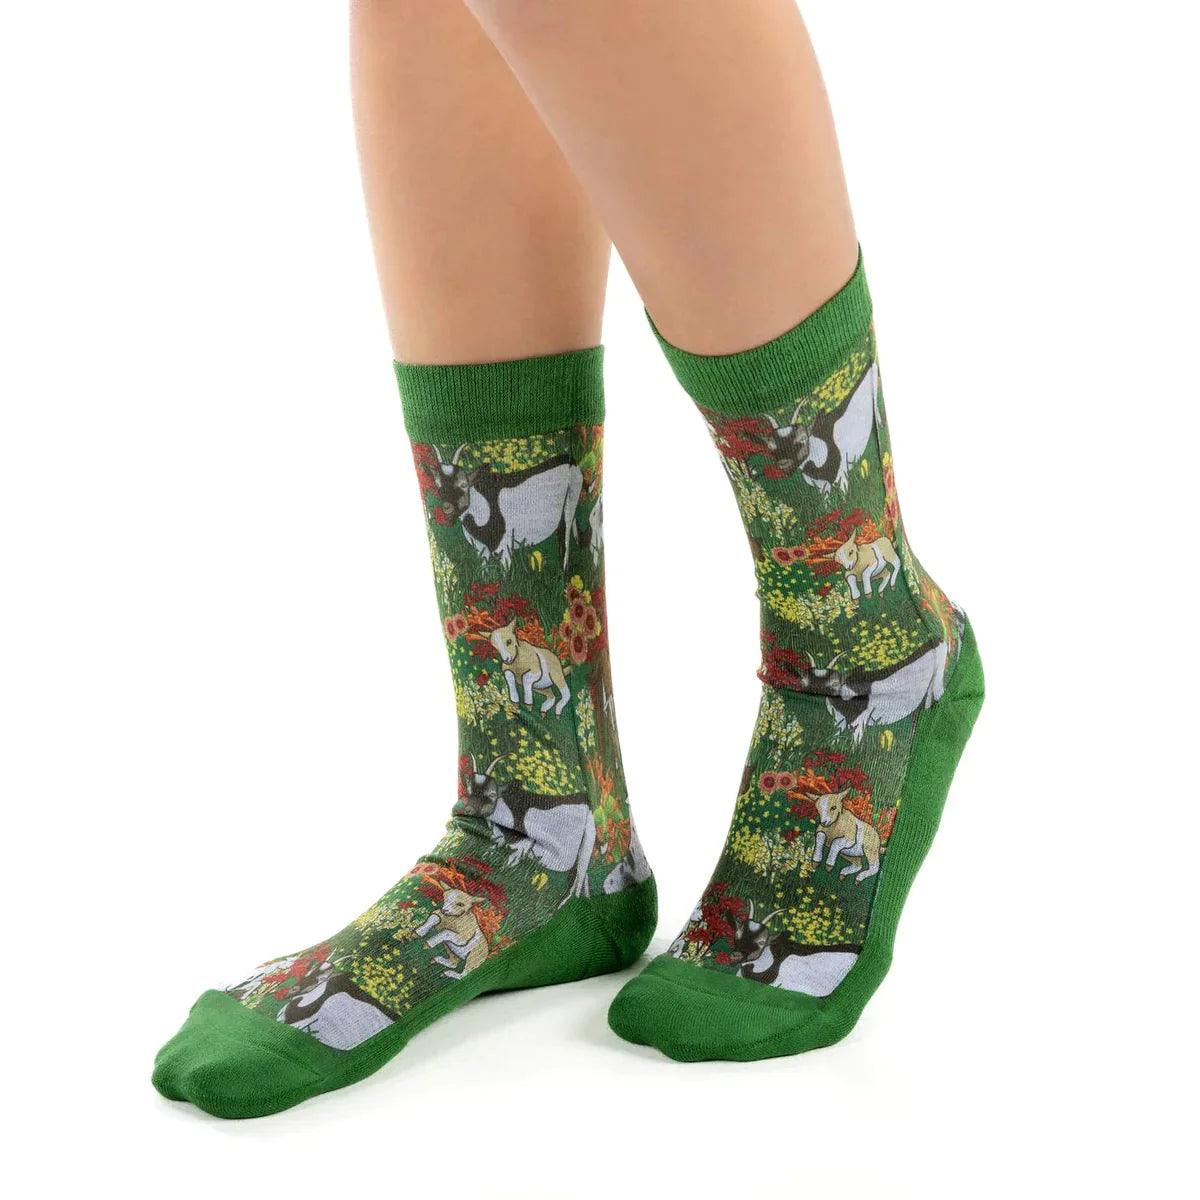 Good Luck Sock Floral Goats - A&M Clothing & Shoes